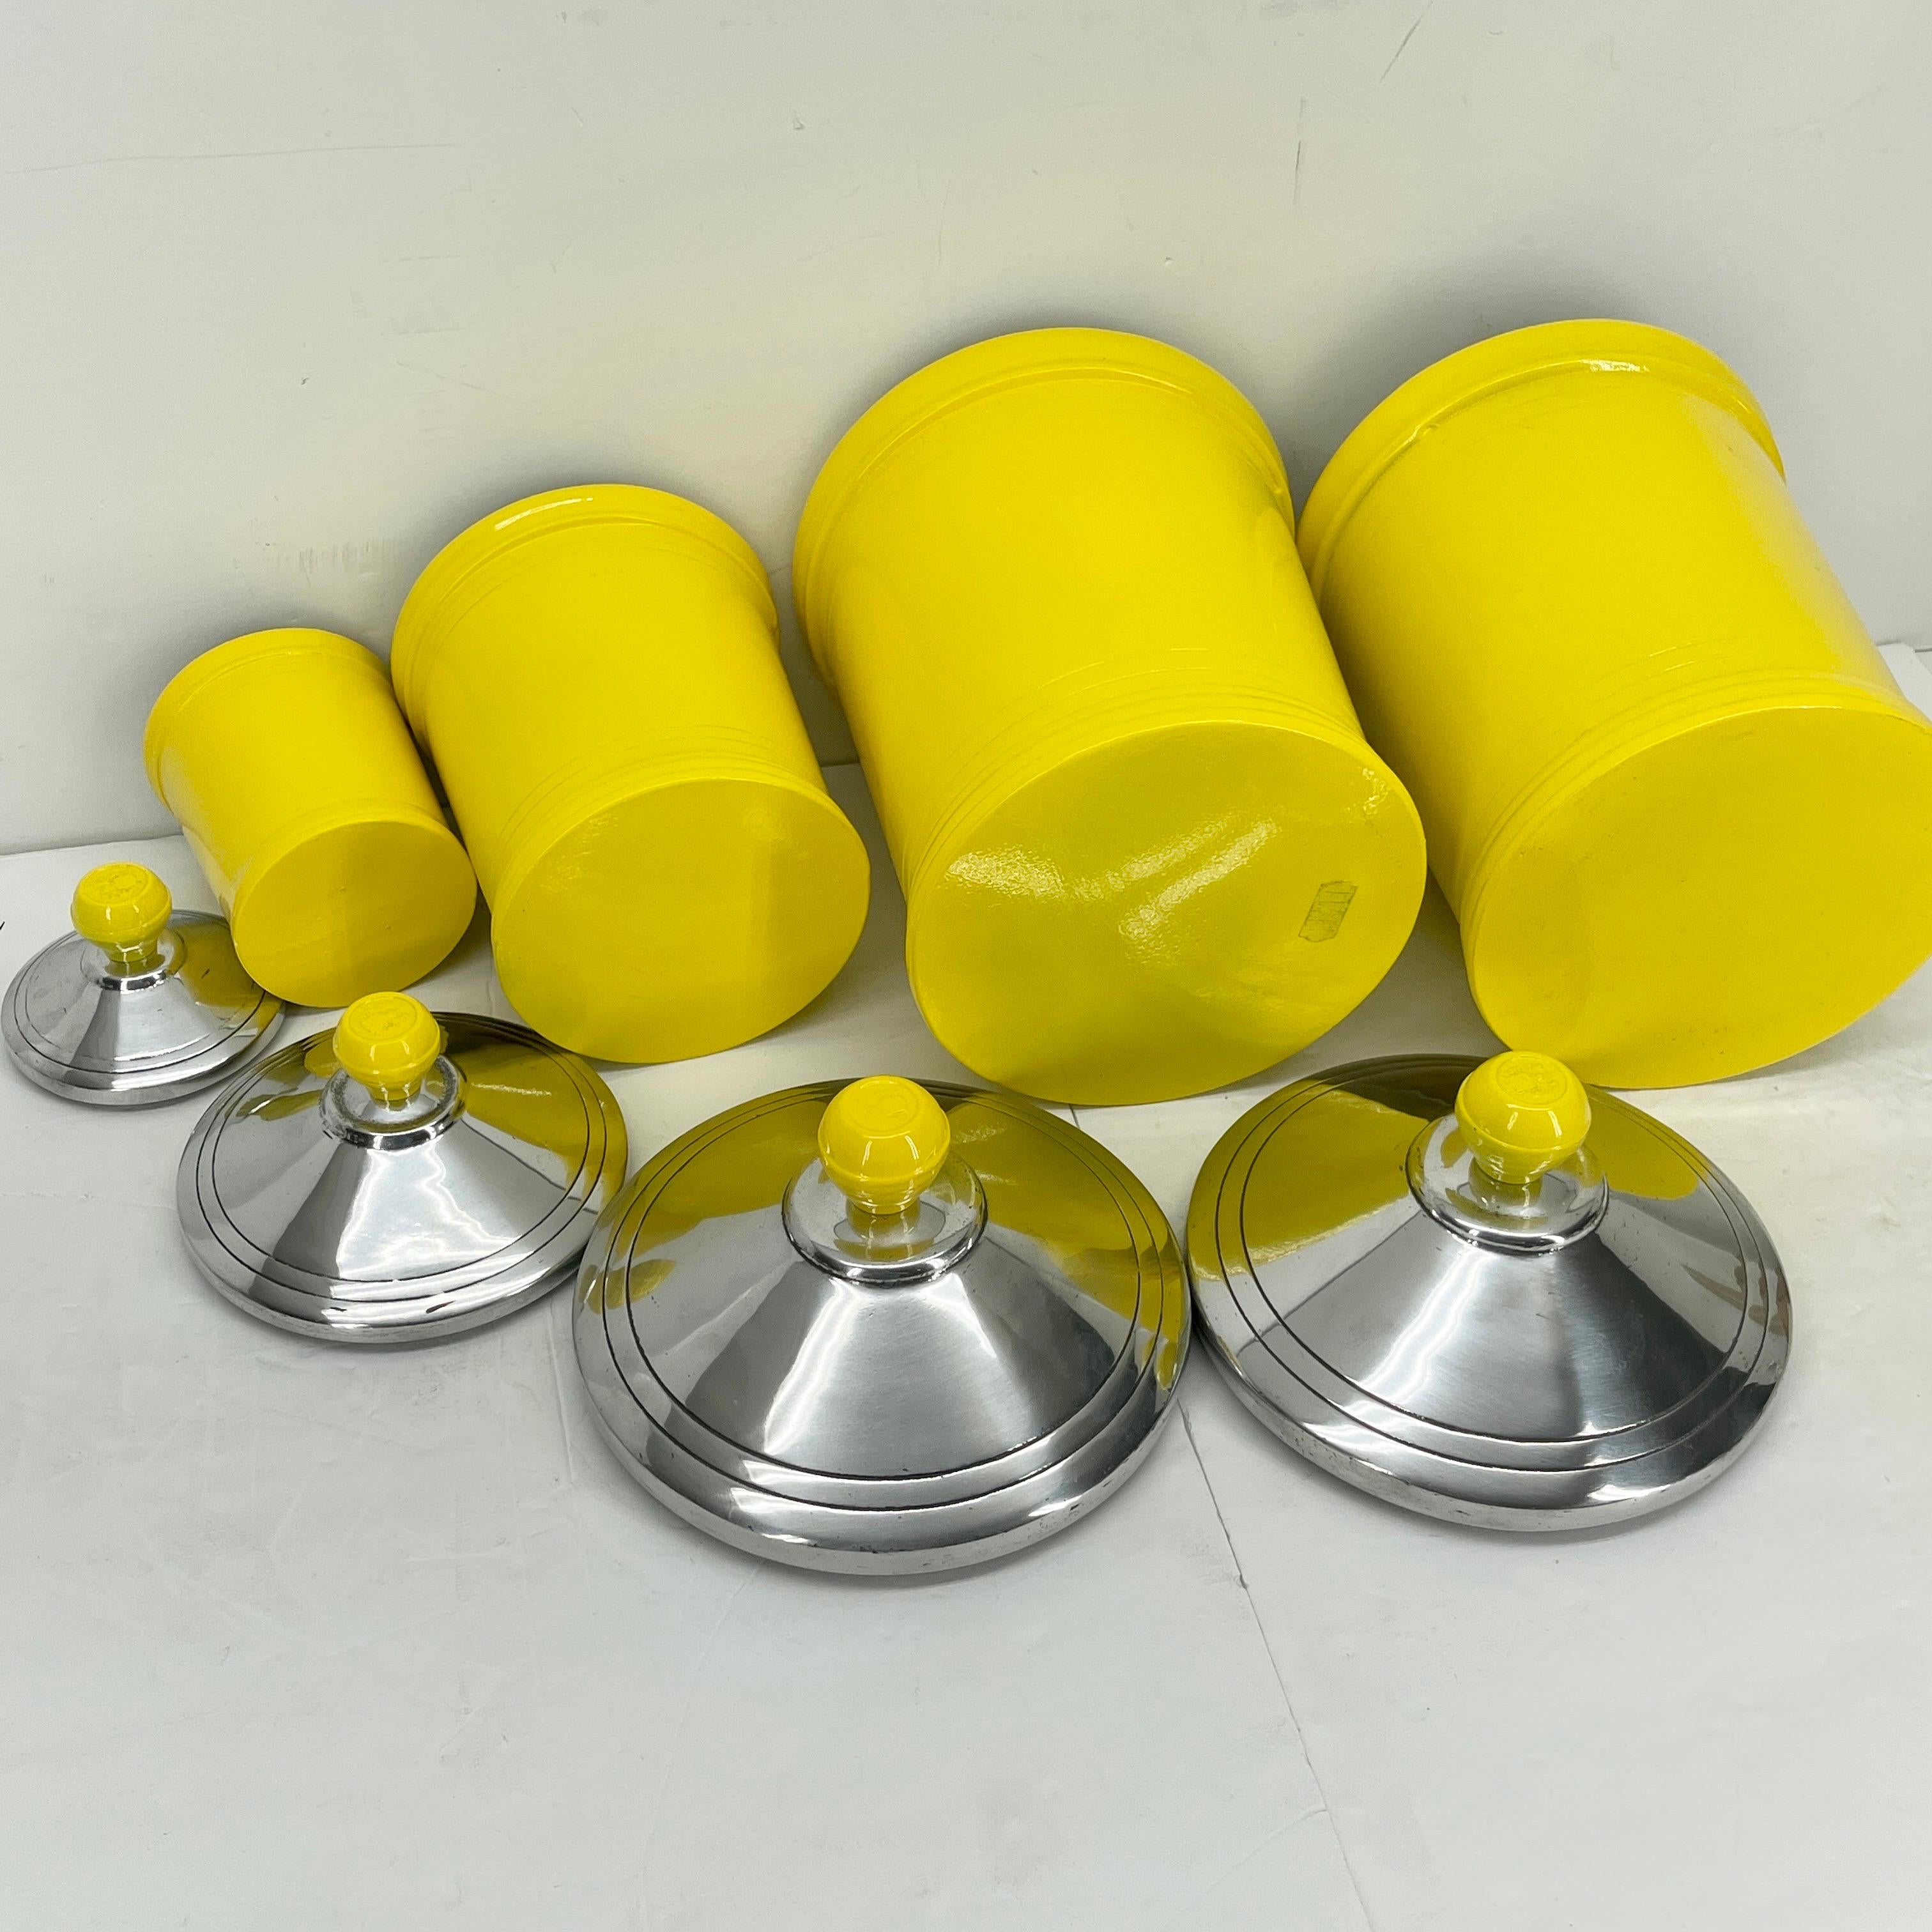 Vintage Kitchen or Bathroom Canister Jars Set, Bright Yellow Powder Coated 2